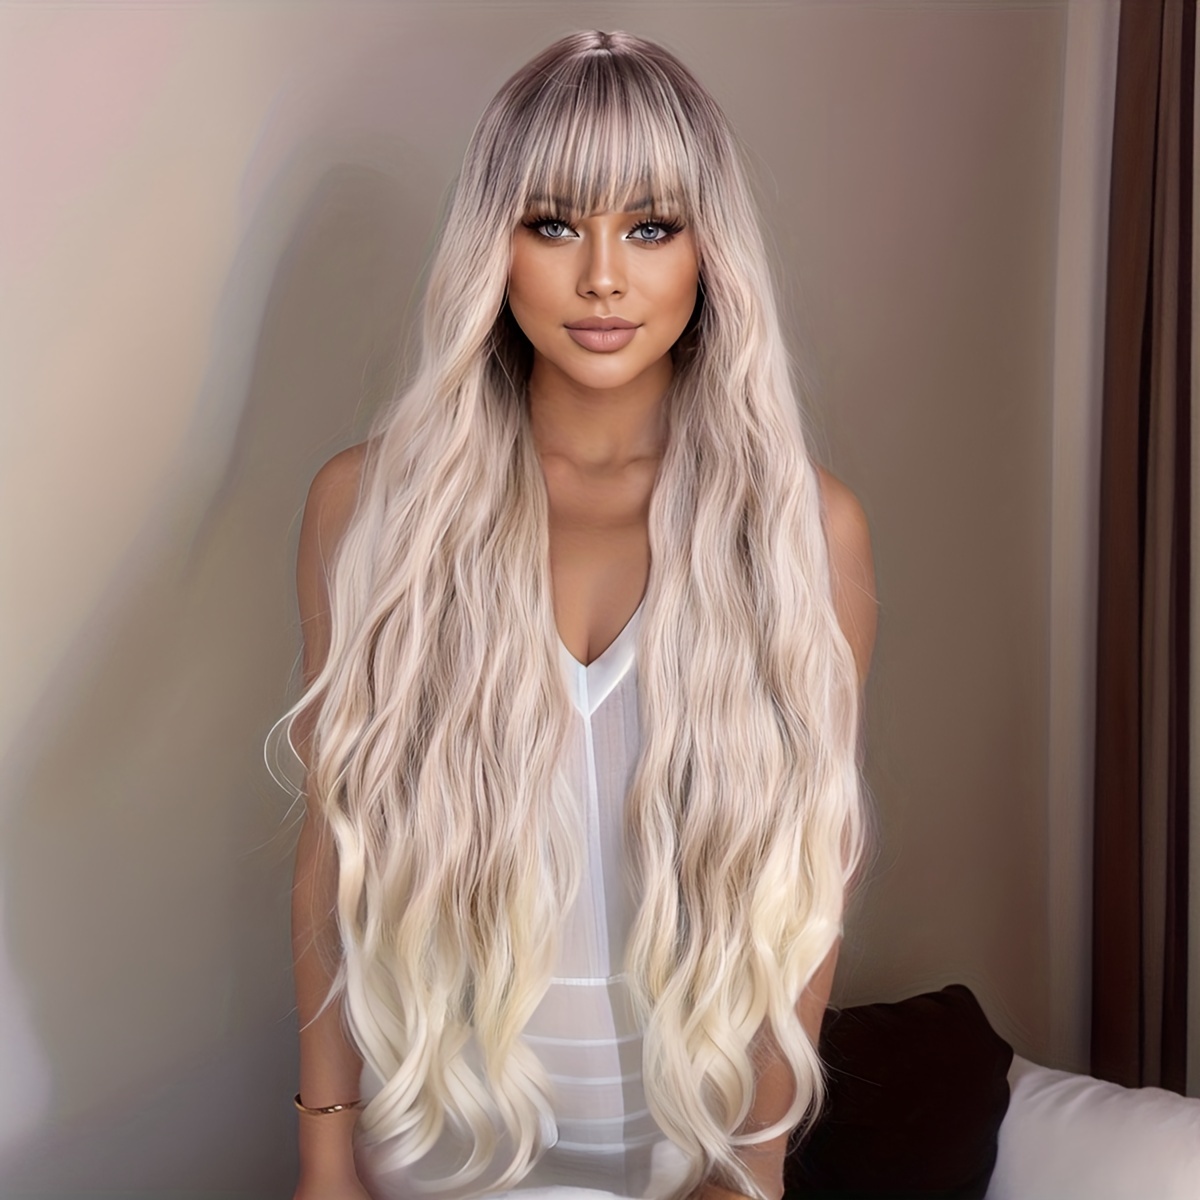 

1pc Blonde Wig With Bangs Long Wavy Curly Ombre Wig With Dark Root Synthetic Heat Resistant Wigs For Women Daily Party Use 28 Inches